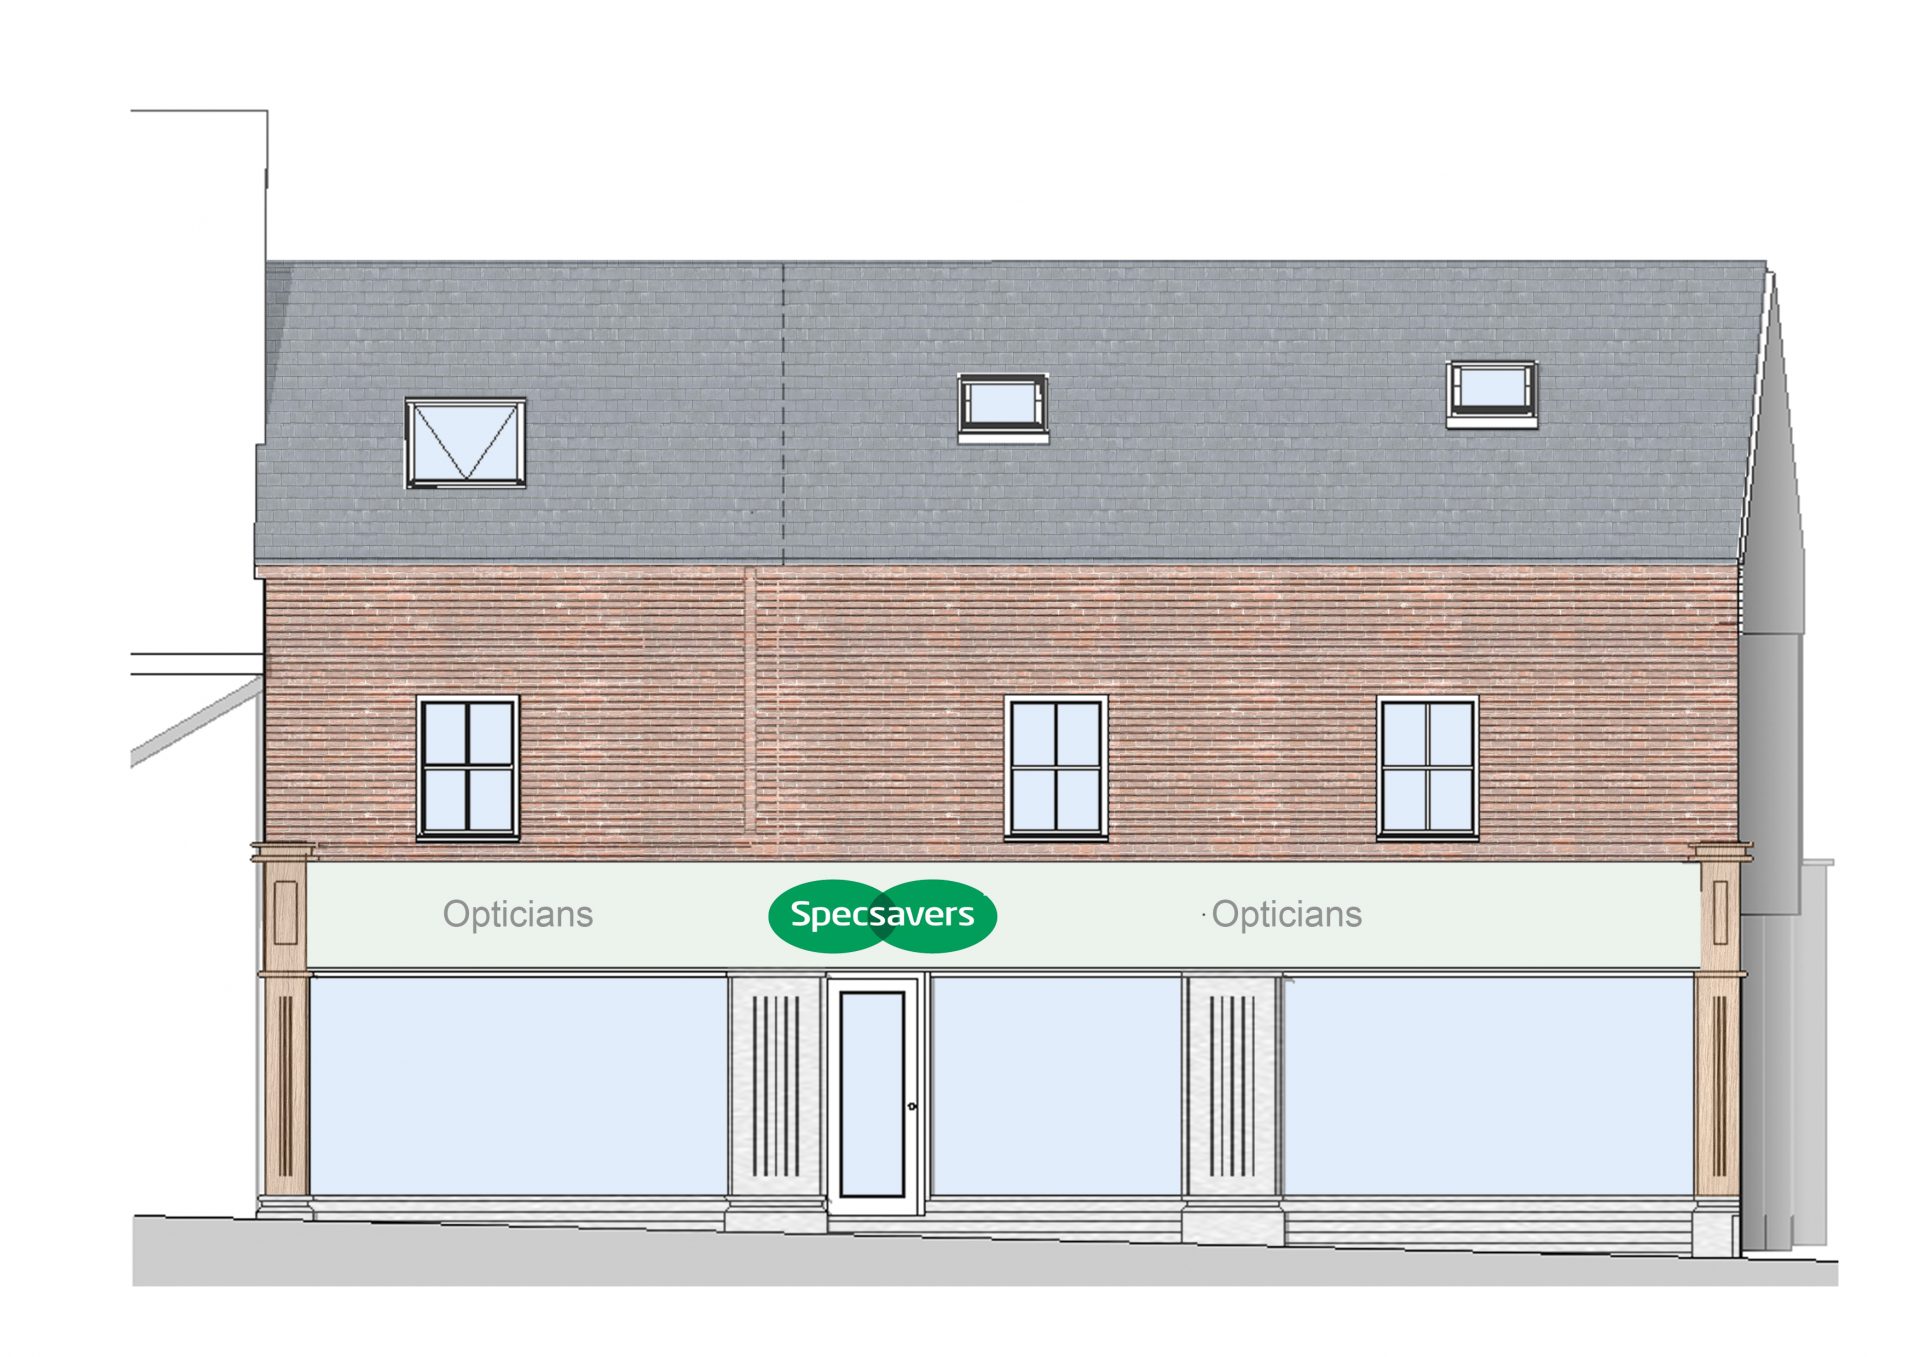 Specsavers Extension and refurbishment